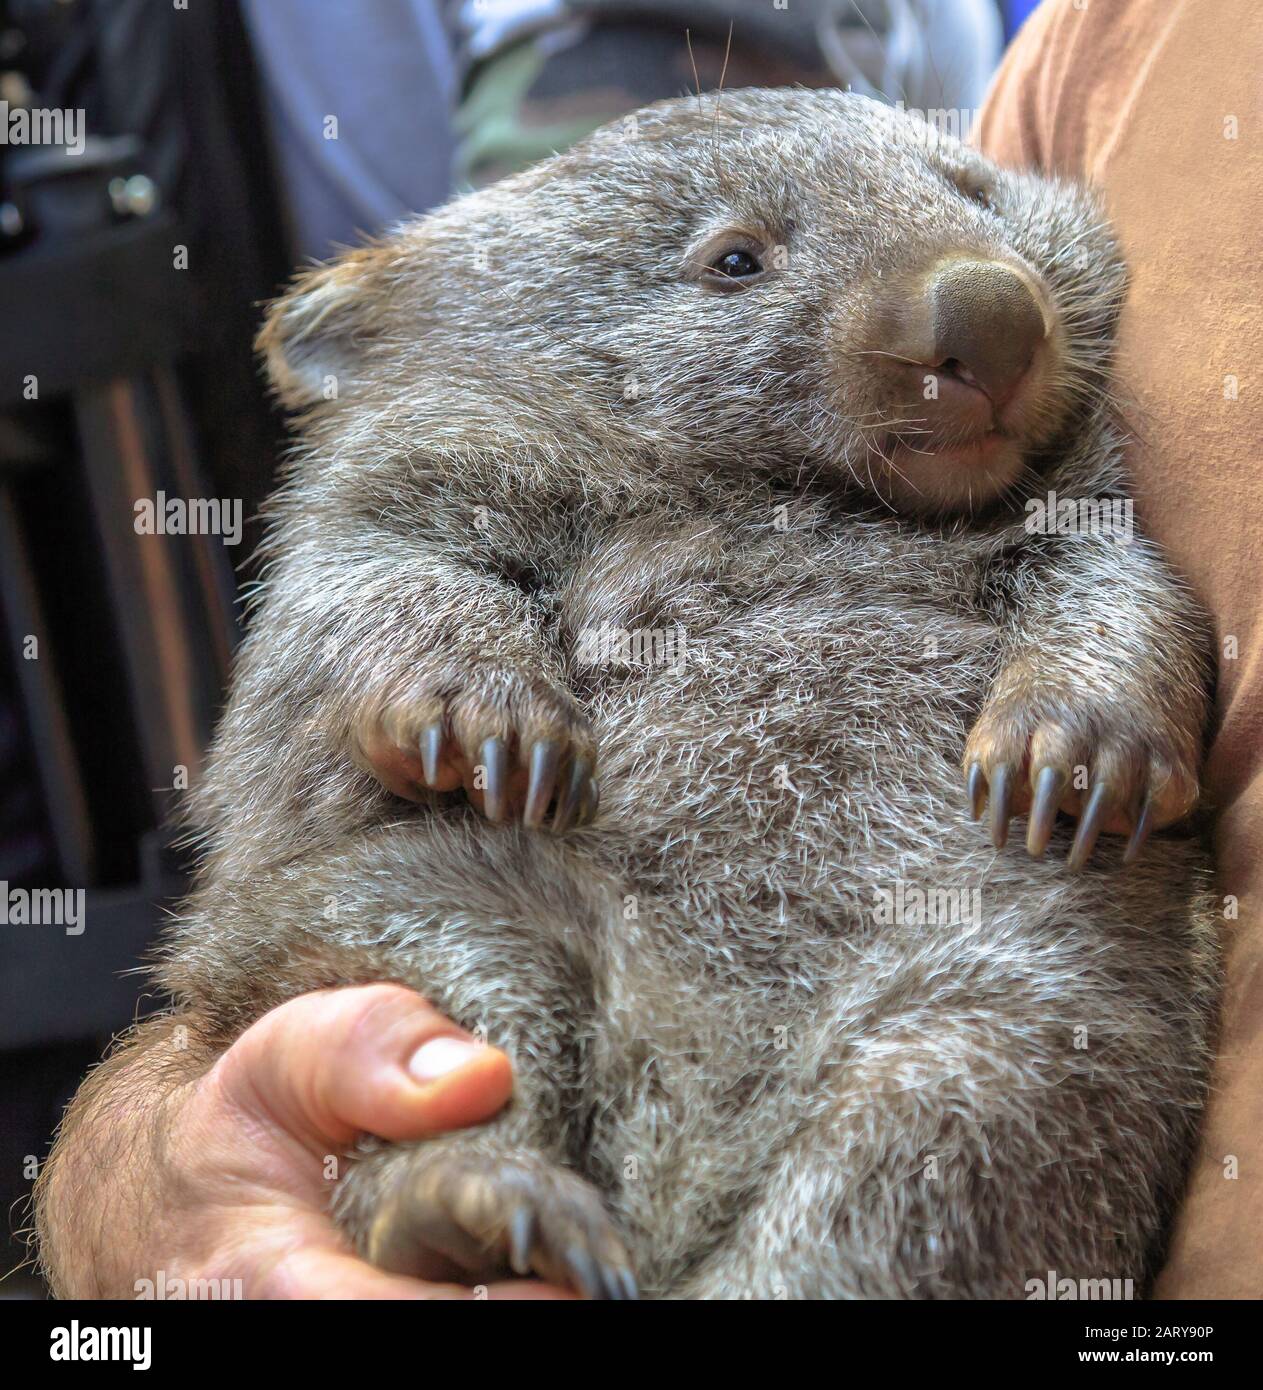 Wombat, Vombatus ursinus, in the arms of a ranger in a fetal position. Closeup of masupial and adult Australian herbivore. Stock Photo